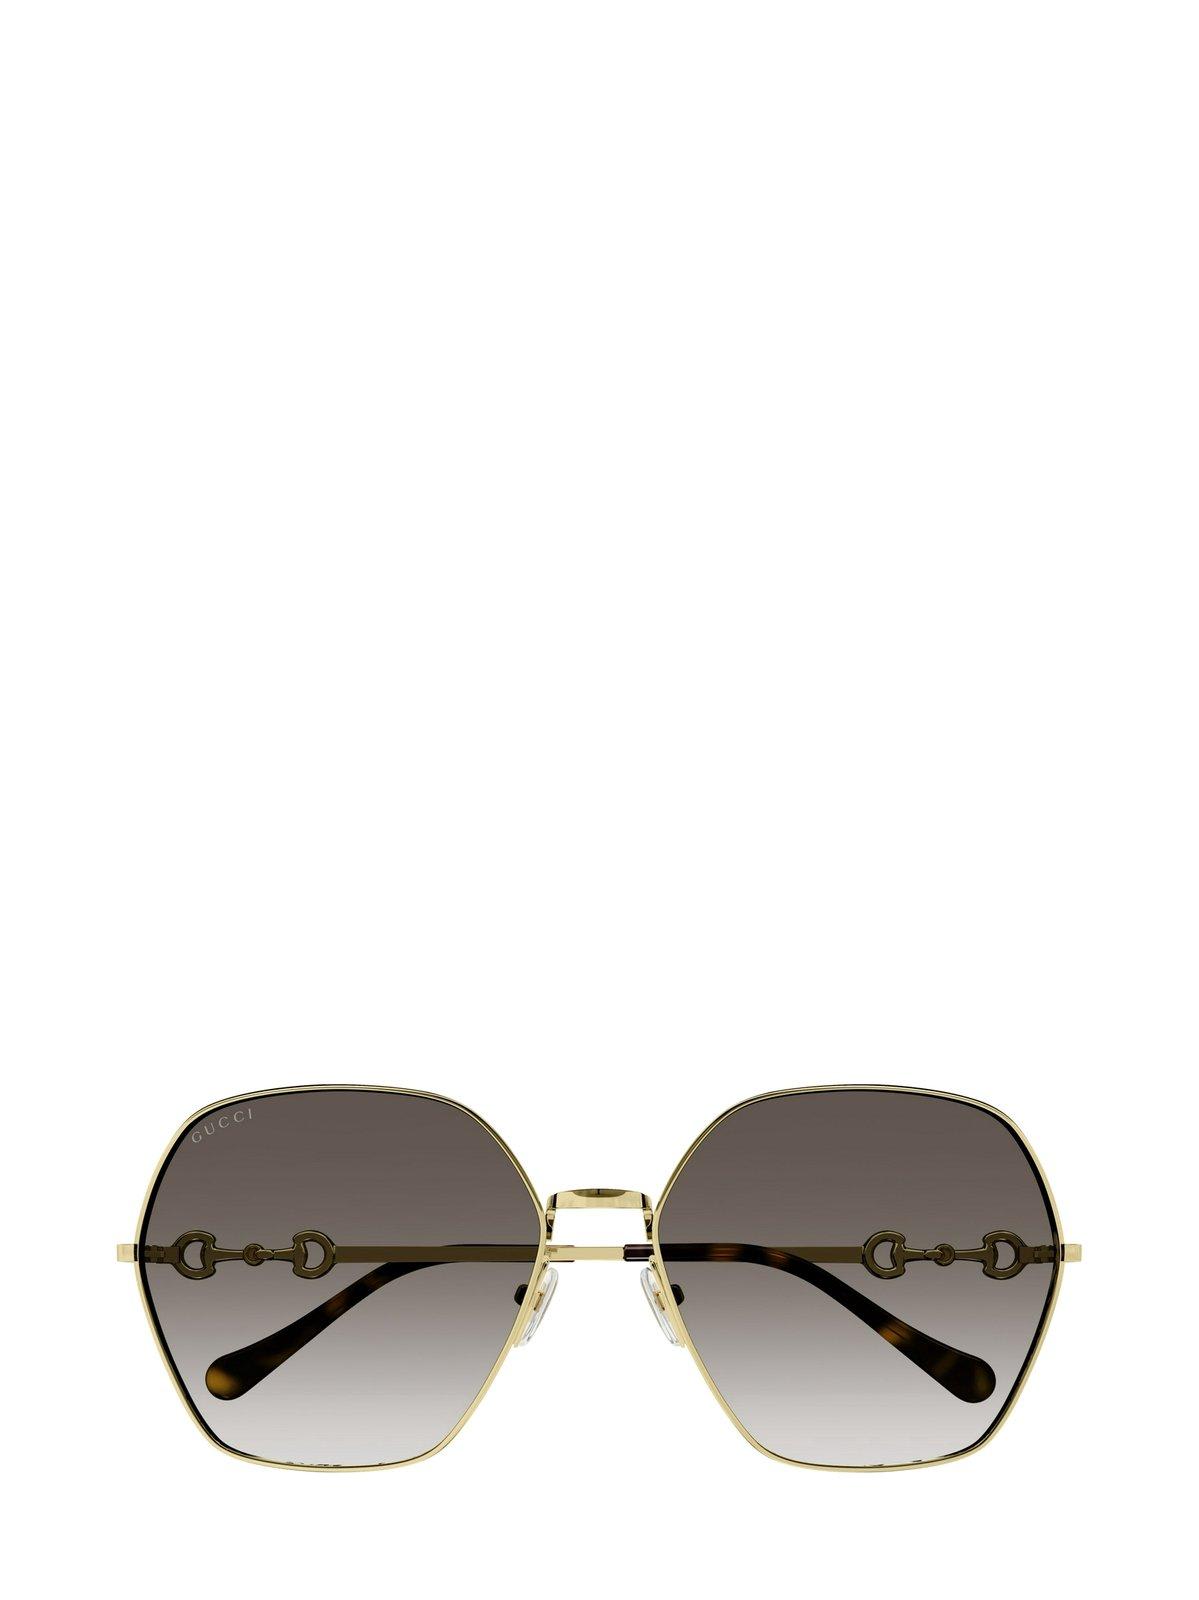 Gucci Round Frame Sunglasses Sunglasses In 002 Gold Gold Brown